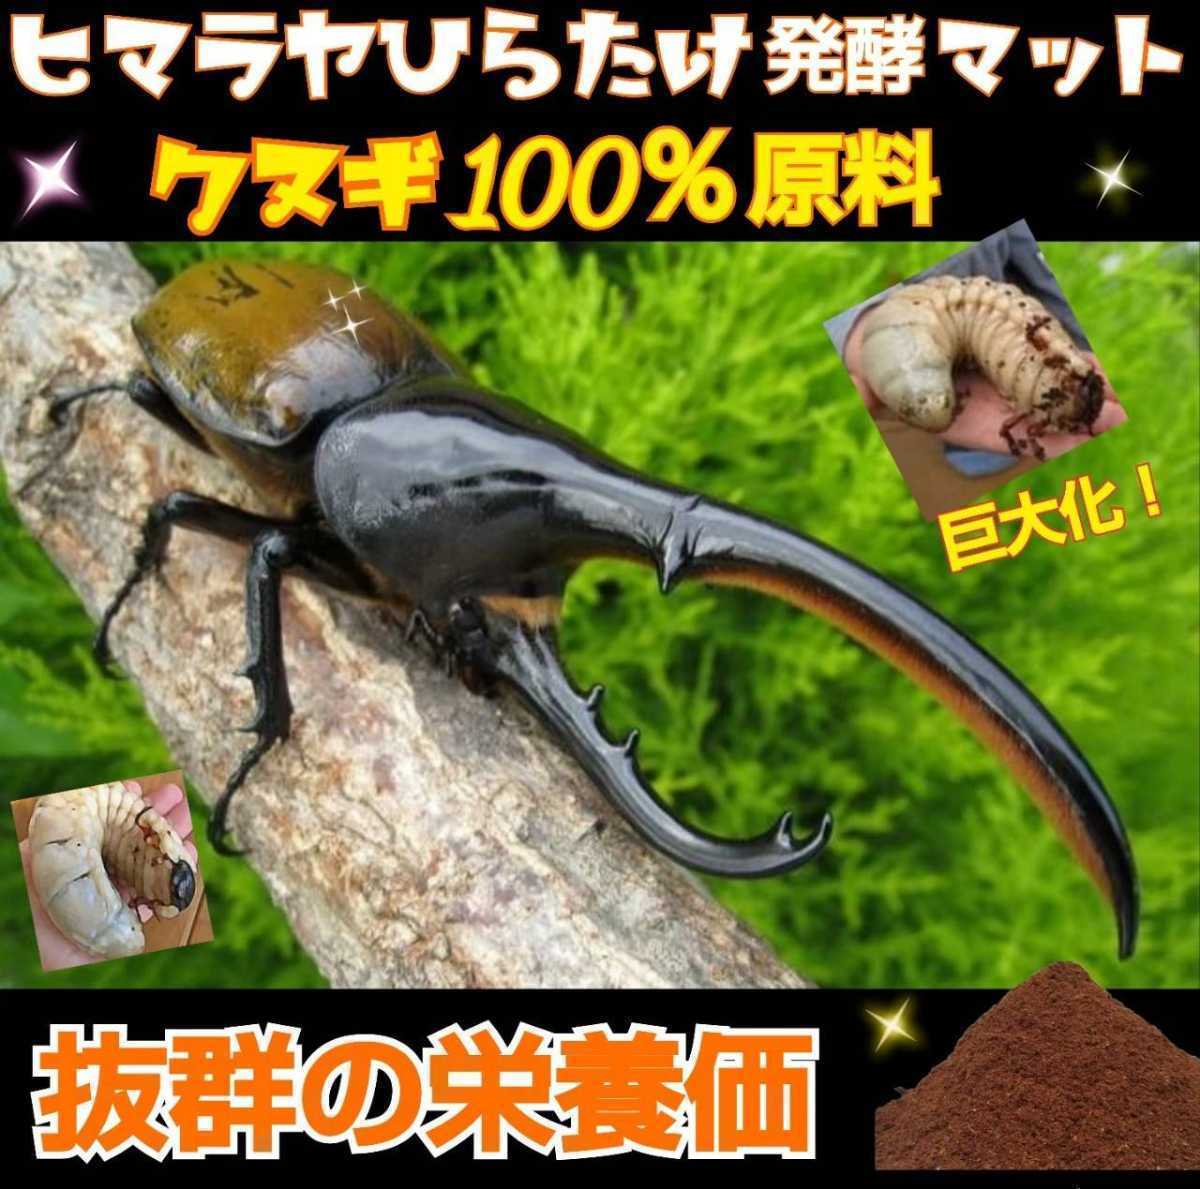  rhinoceros beetle larva . on a grand scale become! improvement version departure . mat [ enough 10 sack ] convenient zipper attaching sack production egg also eminent nutrition addition agent combination . insect ... not 